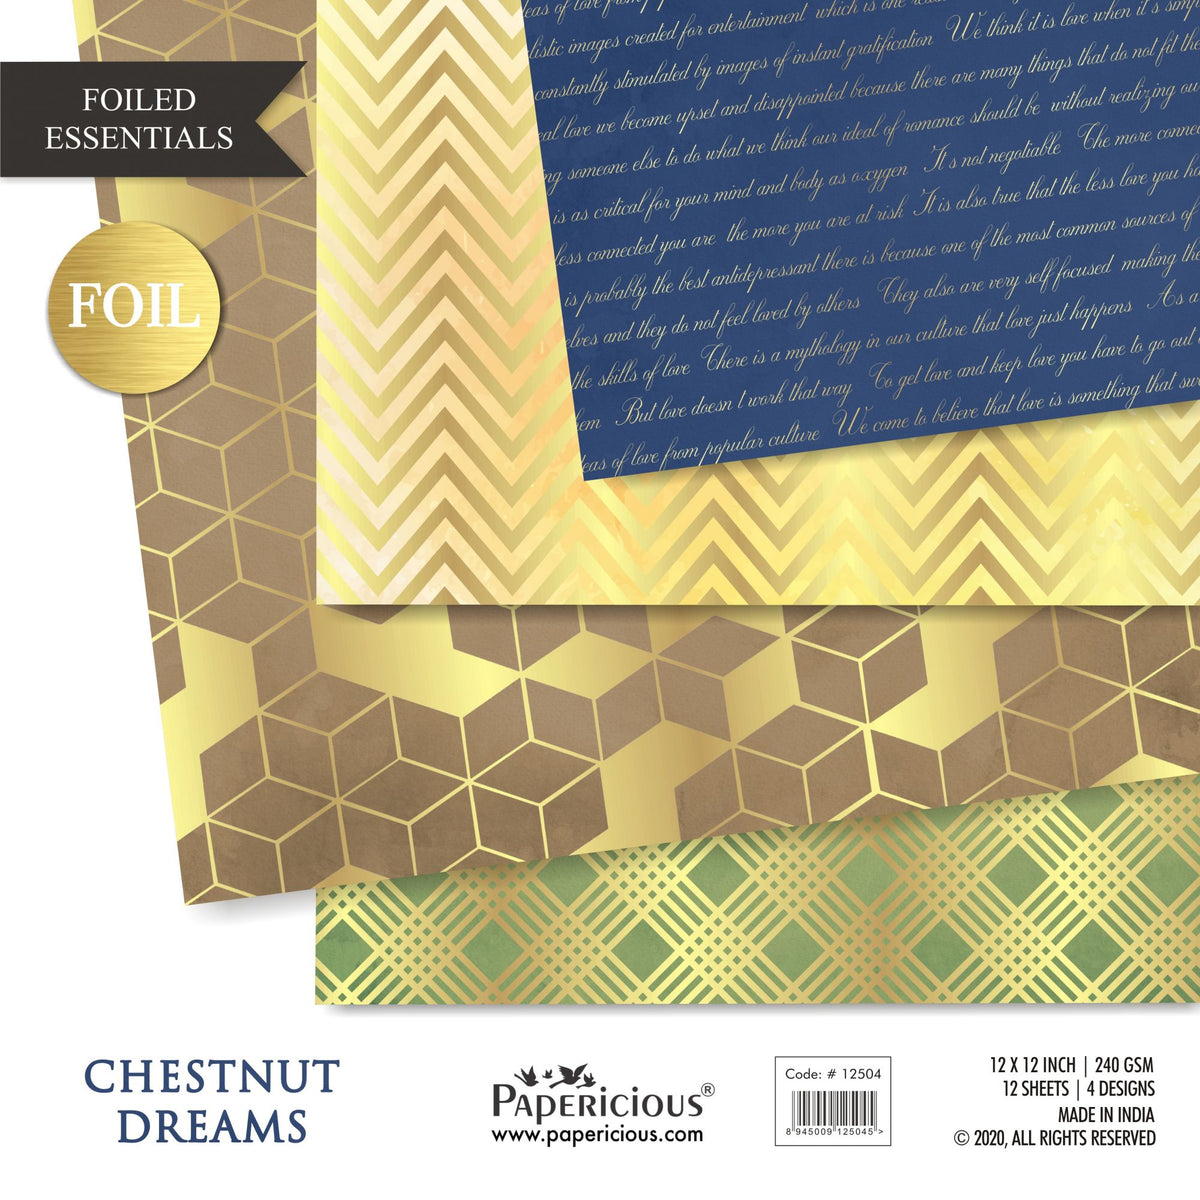 Papericious - Chestnut Dreams - Golden Foiled Pattern Scrapbook Papers 12x12 inch / 12 sheets